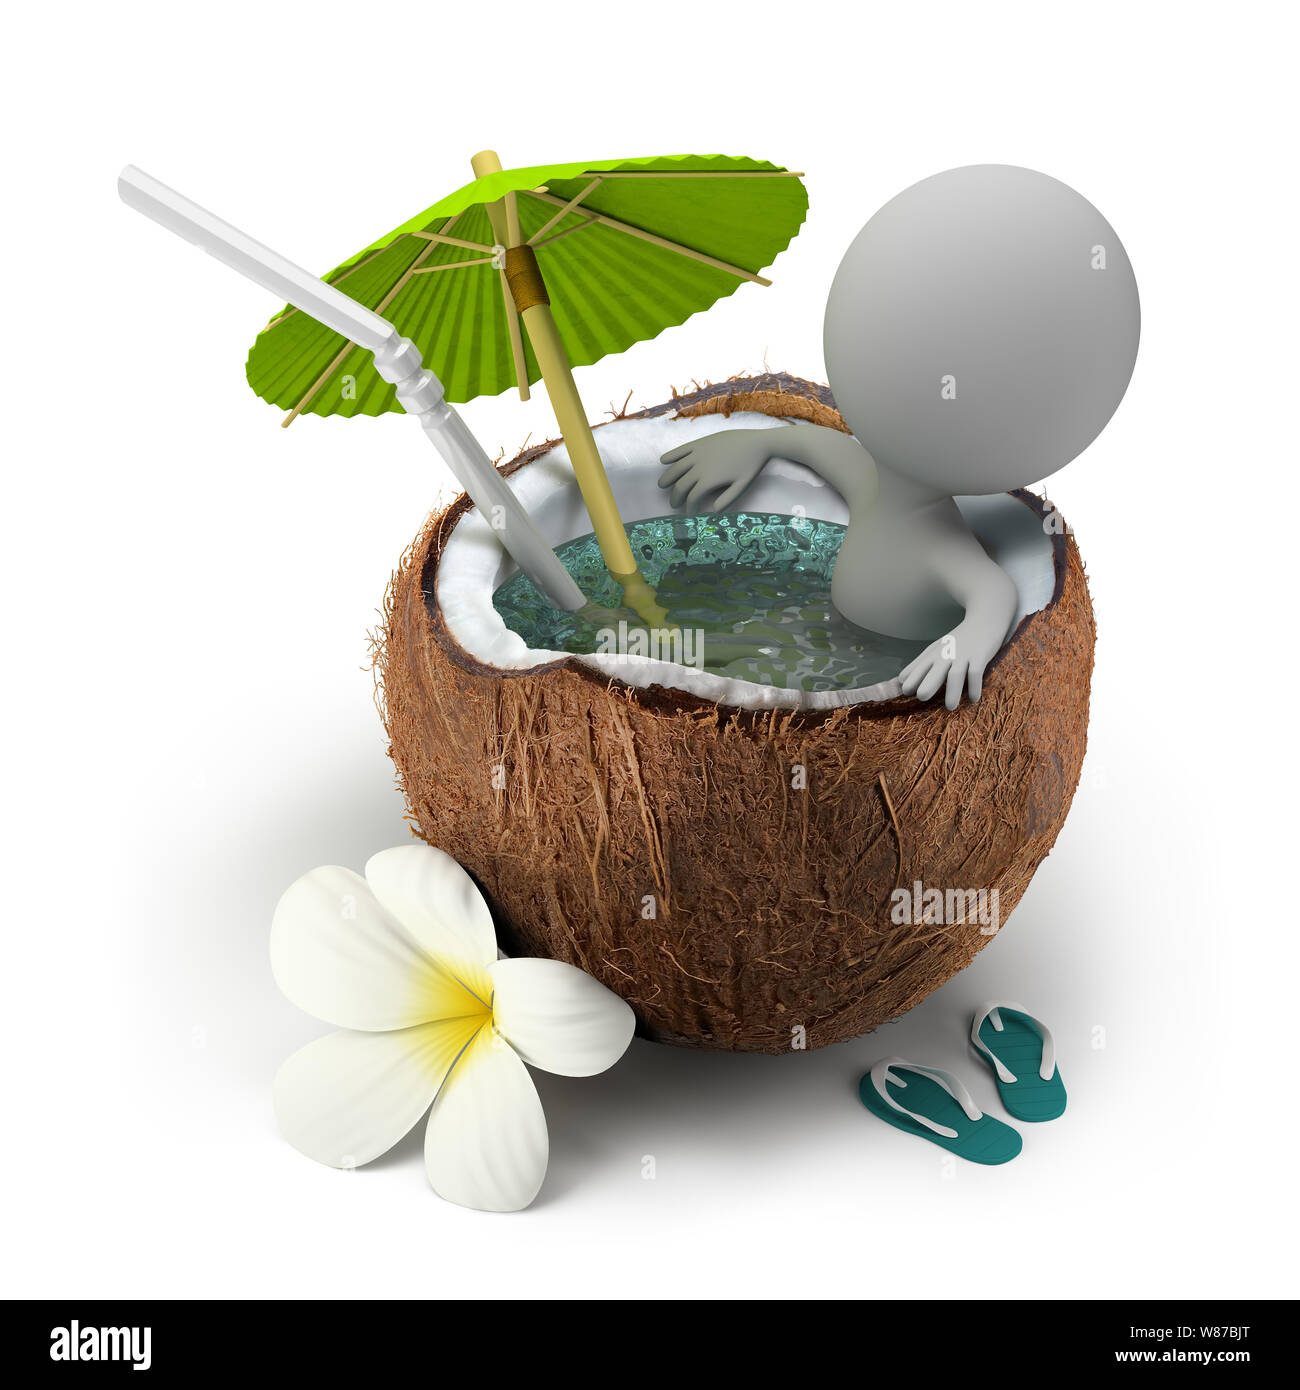 3d small person sitting in a coconut bath under an umbrella. 3d image. Isolated white background. Stock Photo